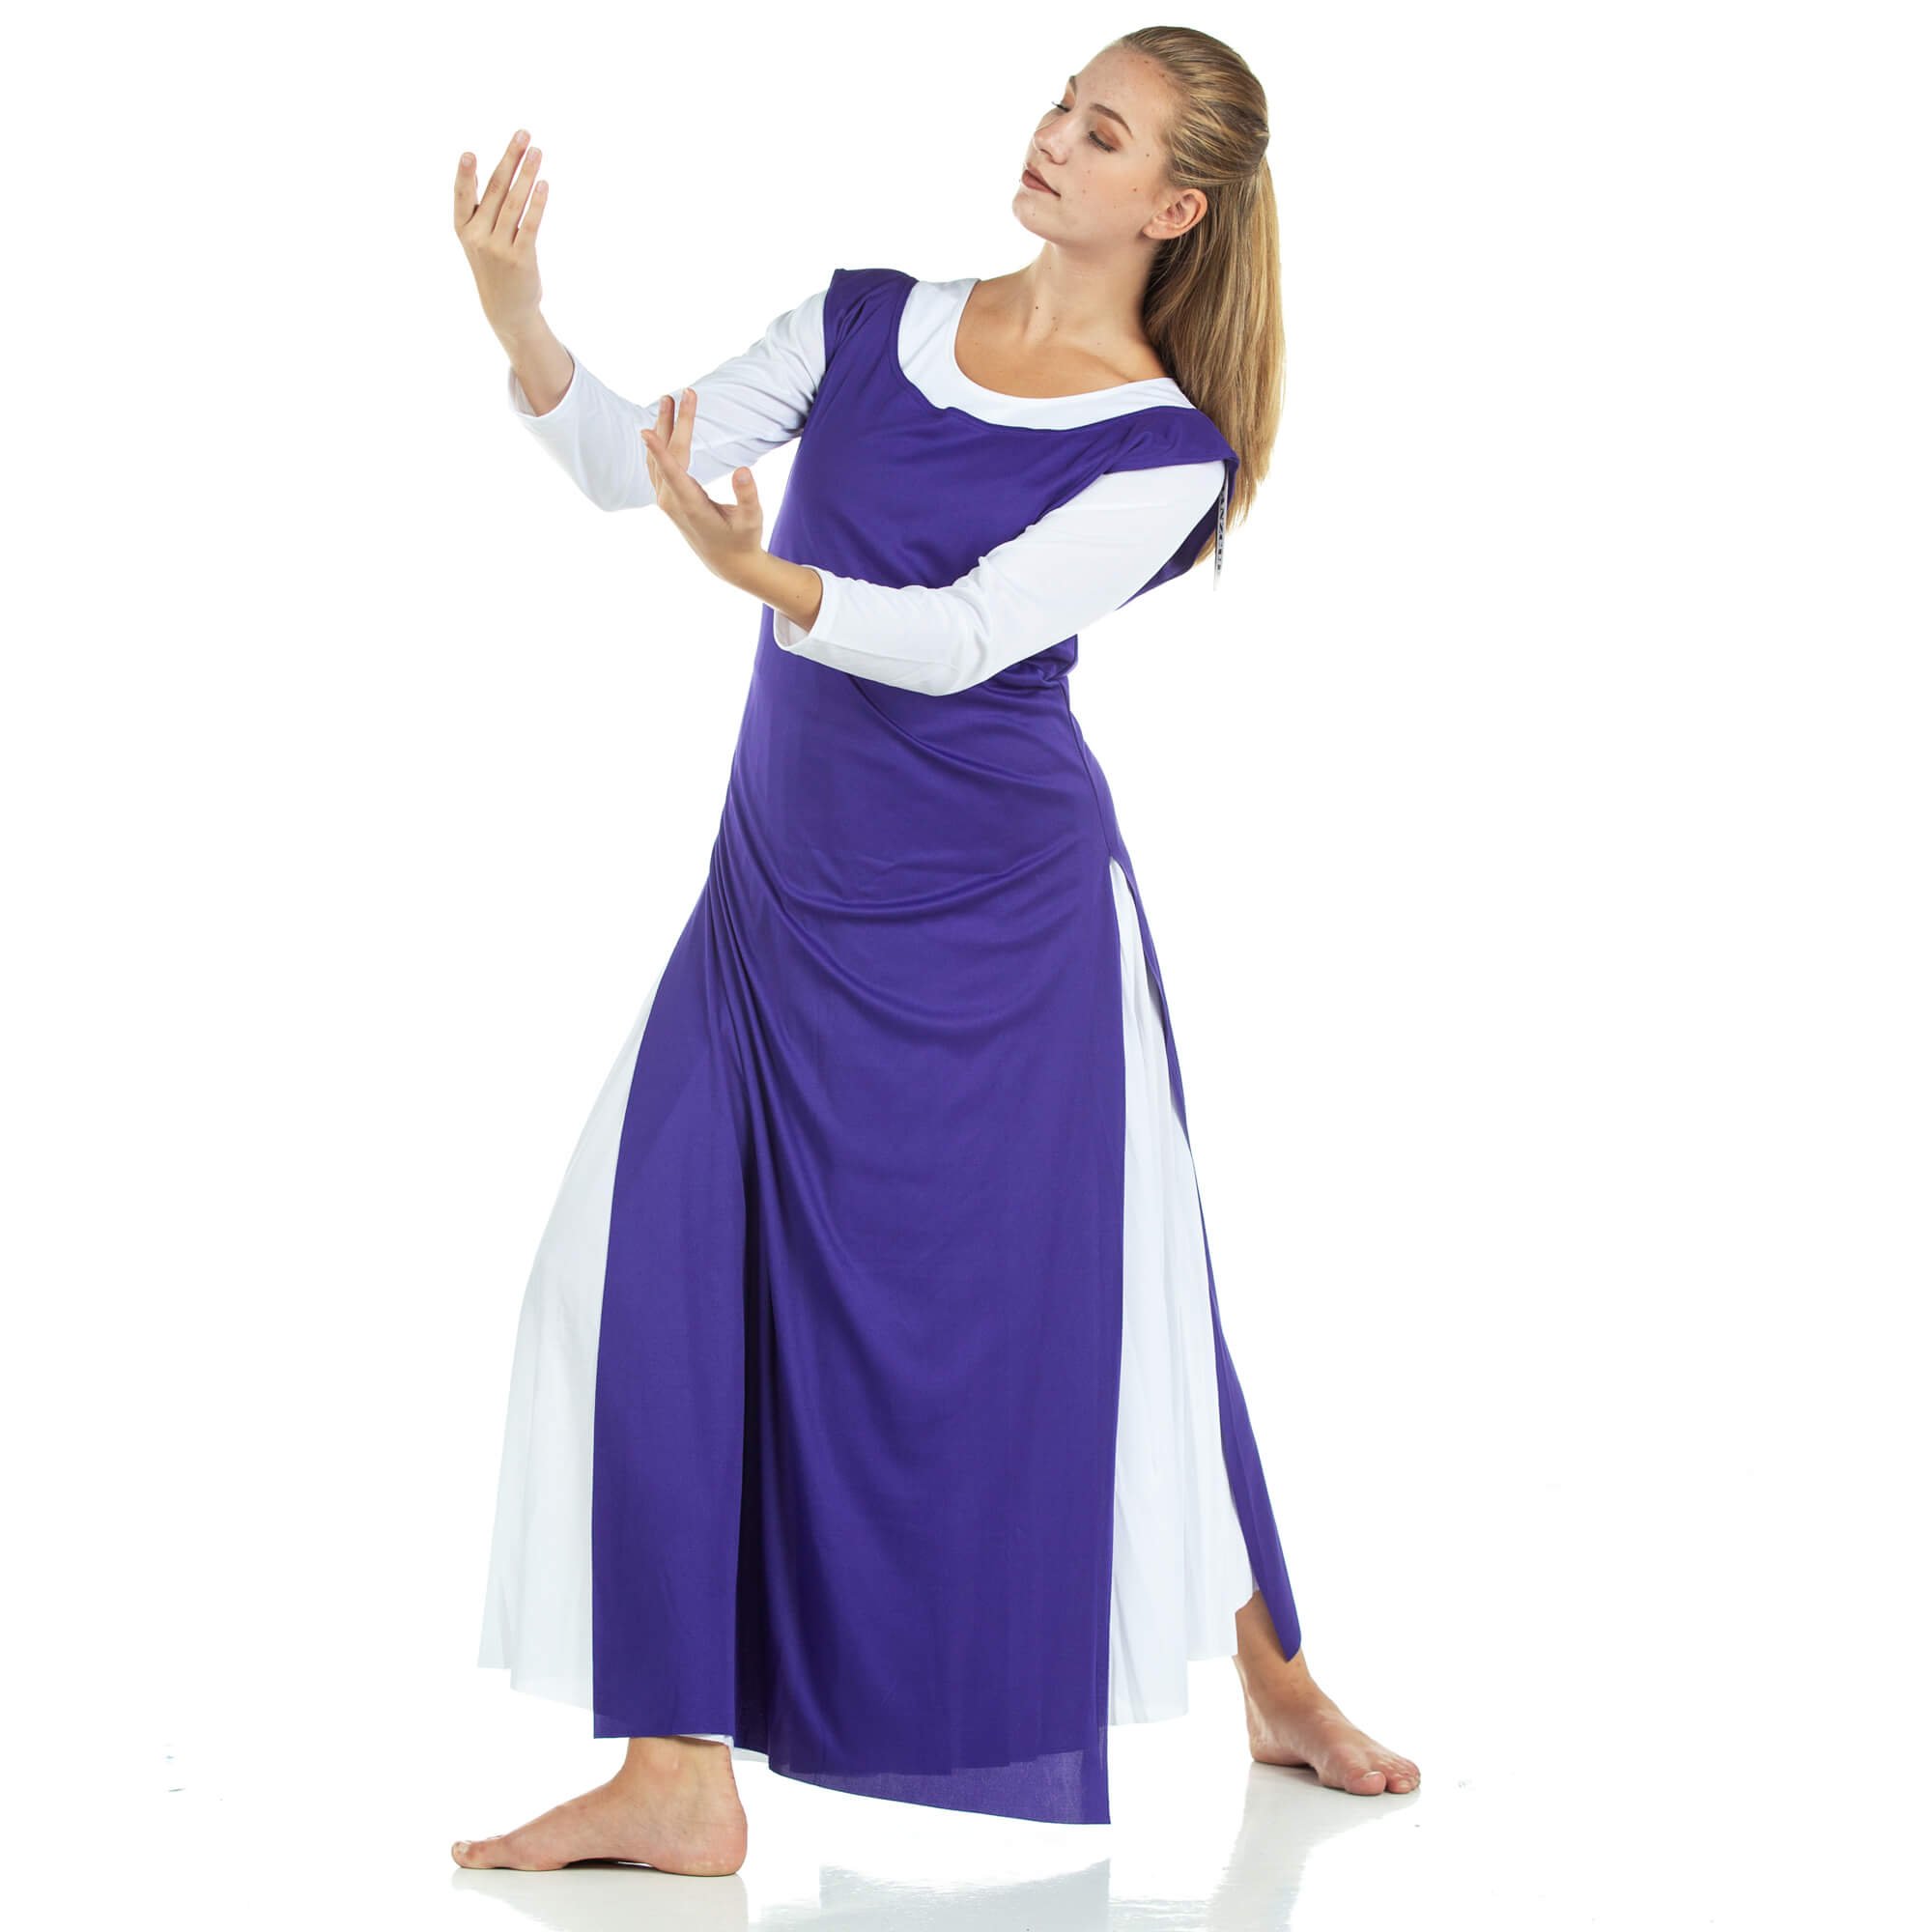 Tunic Worship Dance with Side Slits (white dress not included) - Click Image to Close